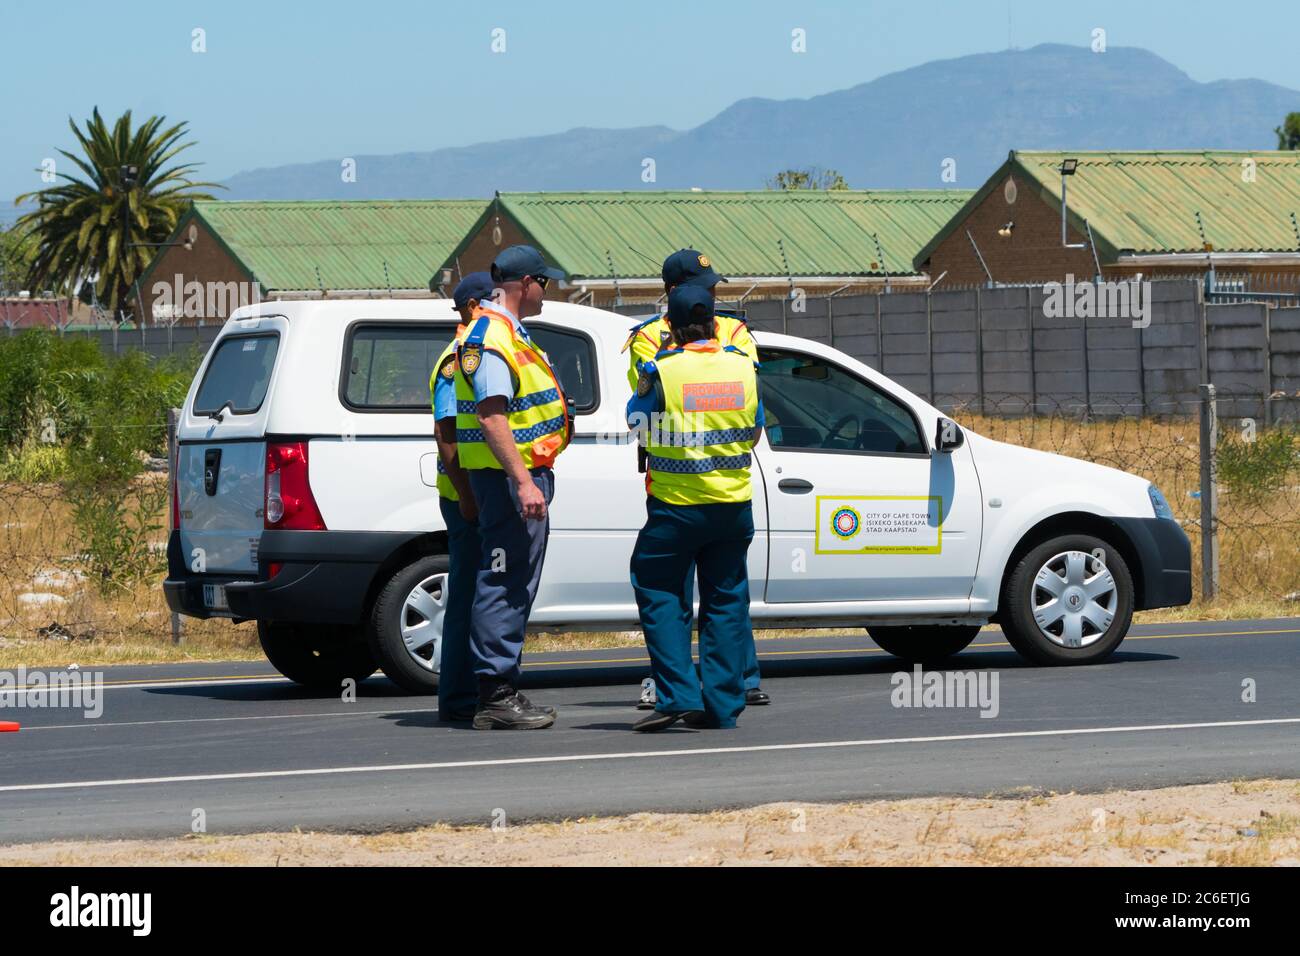 City of Cape Town traffic cops or officials on duty with a patrol van or car on the side of the road in Cape Town, South Africa Stock Photo